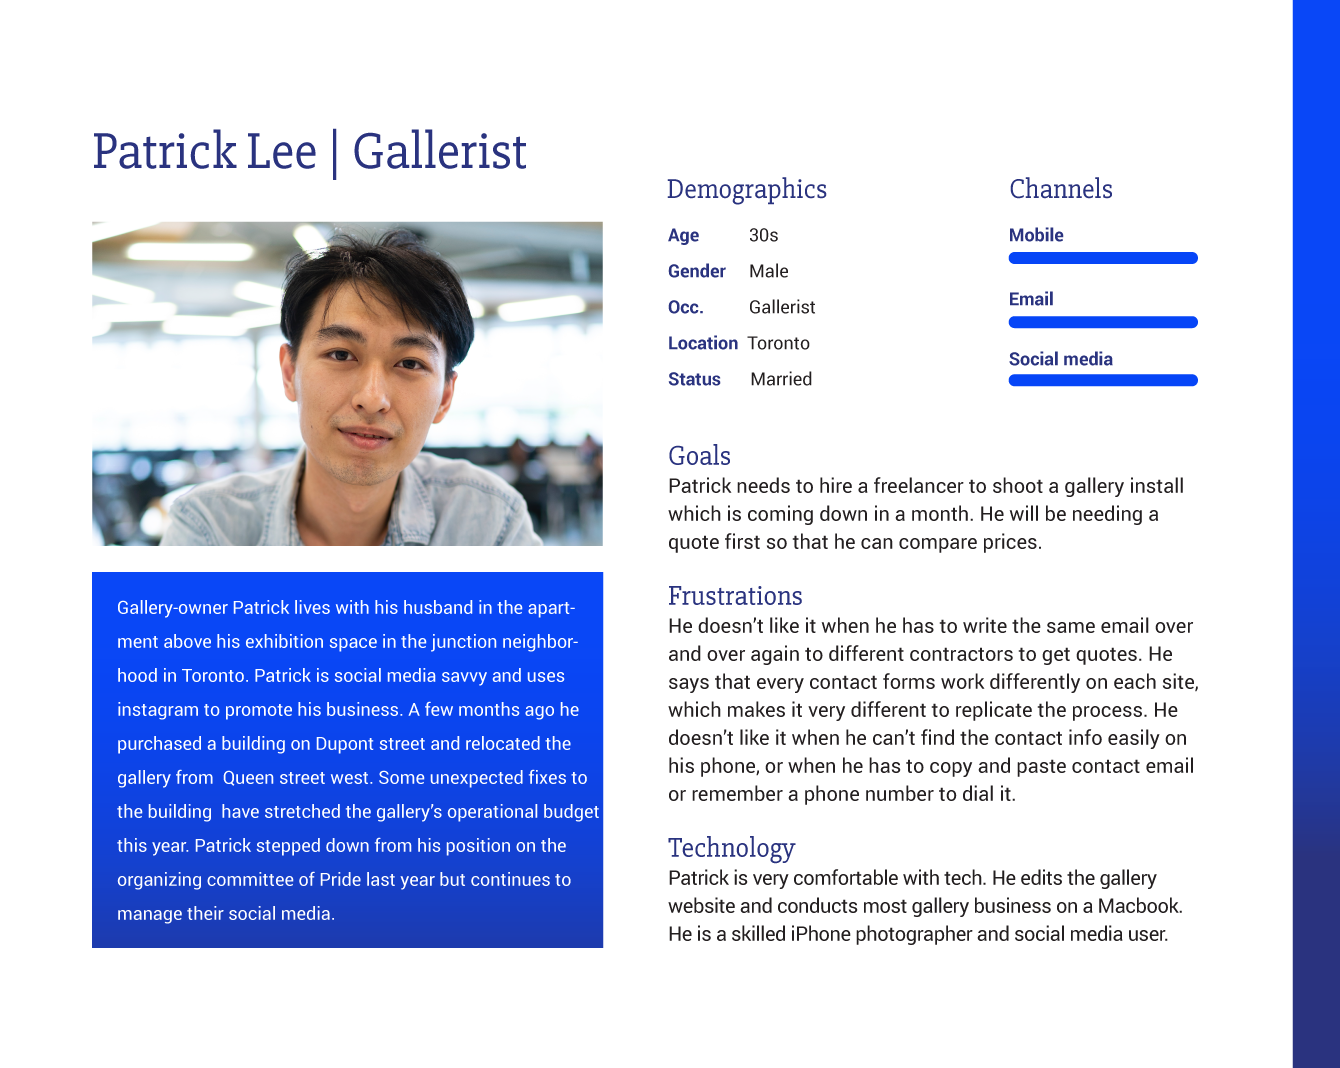 Gallerist persona which describes goals, frustrations and channels for this user type